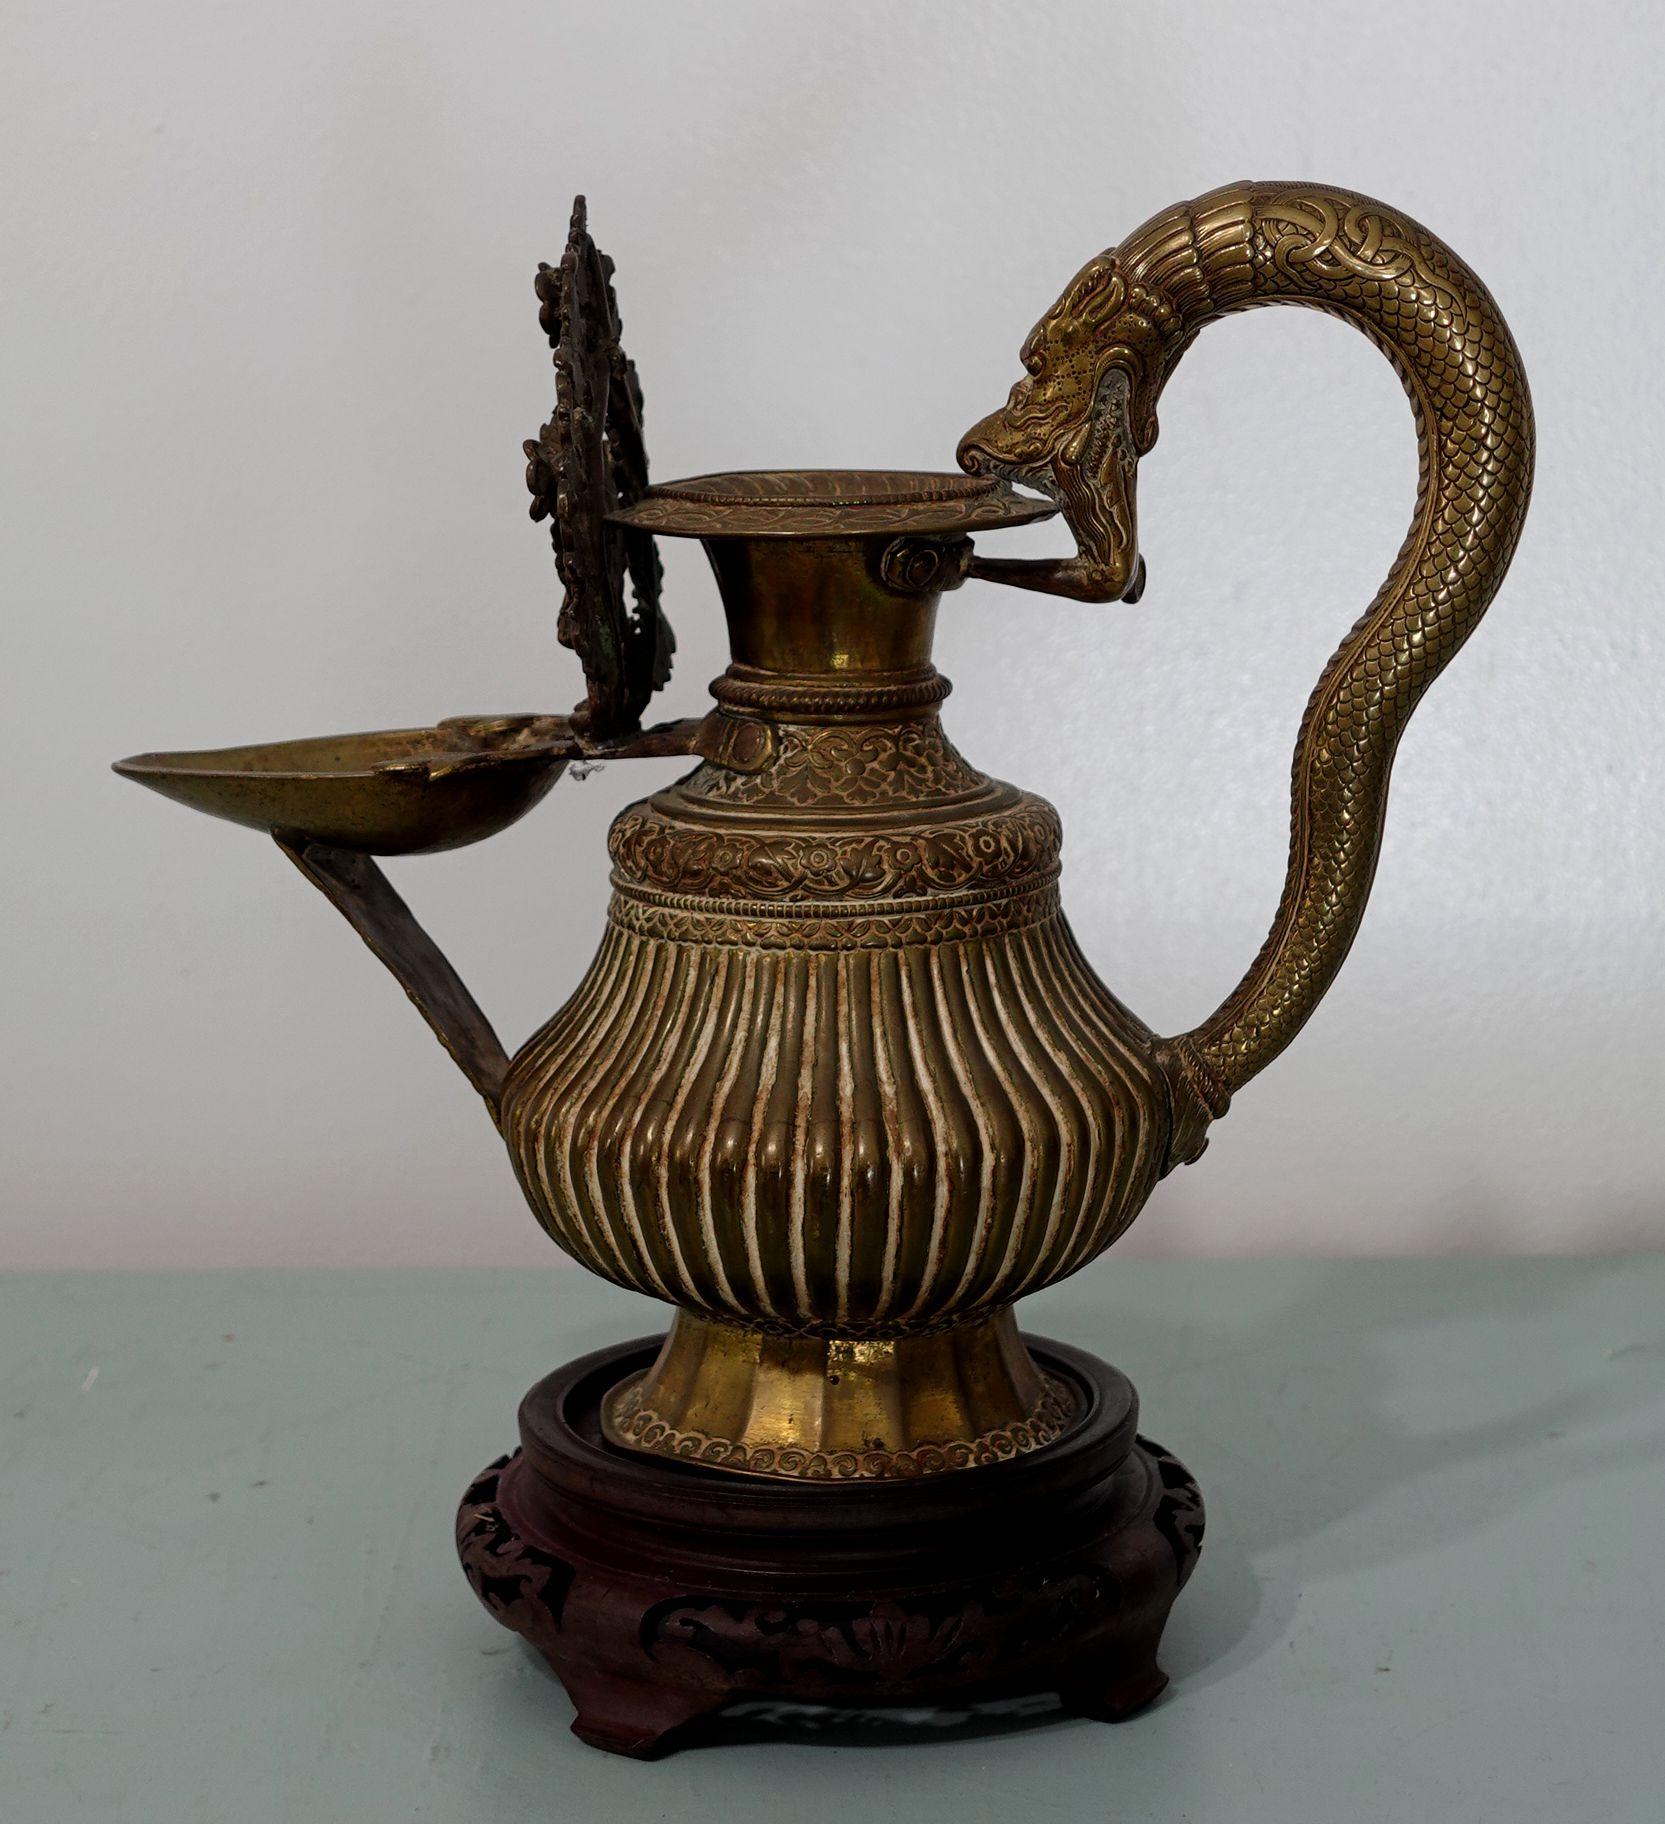 A 19th-century bronze oil lamp with intricated and complicated handcraft and carving, possibly from Tibet. The nozzle and handle feature Buddhist figures. Dimensions are 9.5 inches tall X 11.5